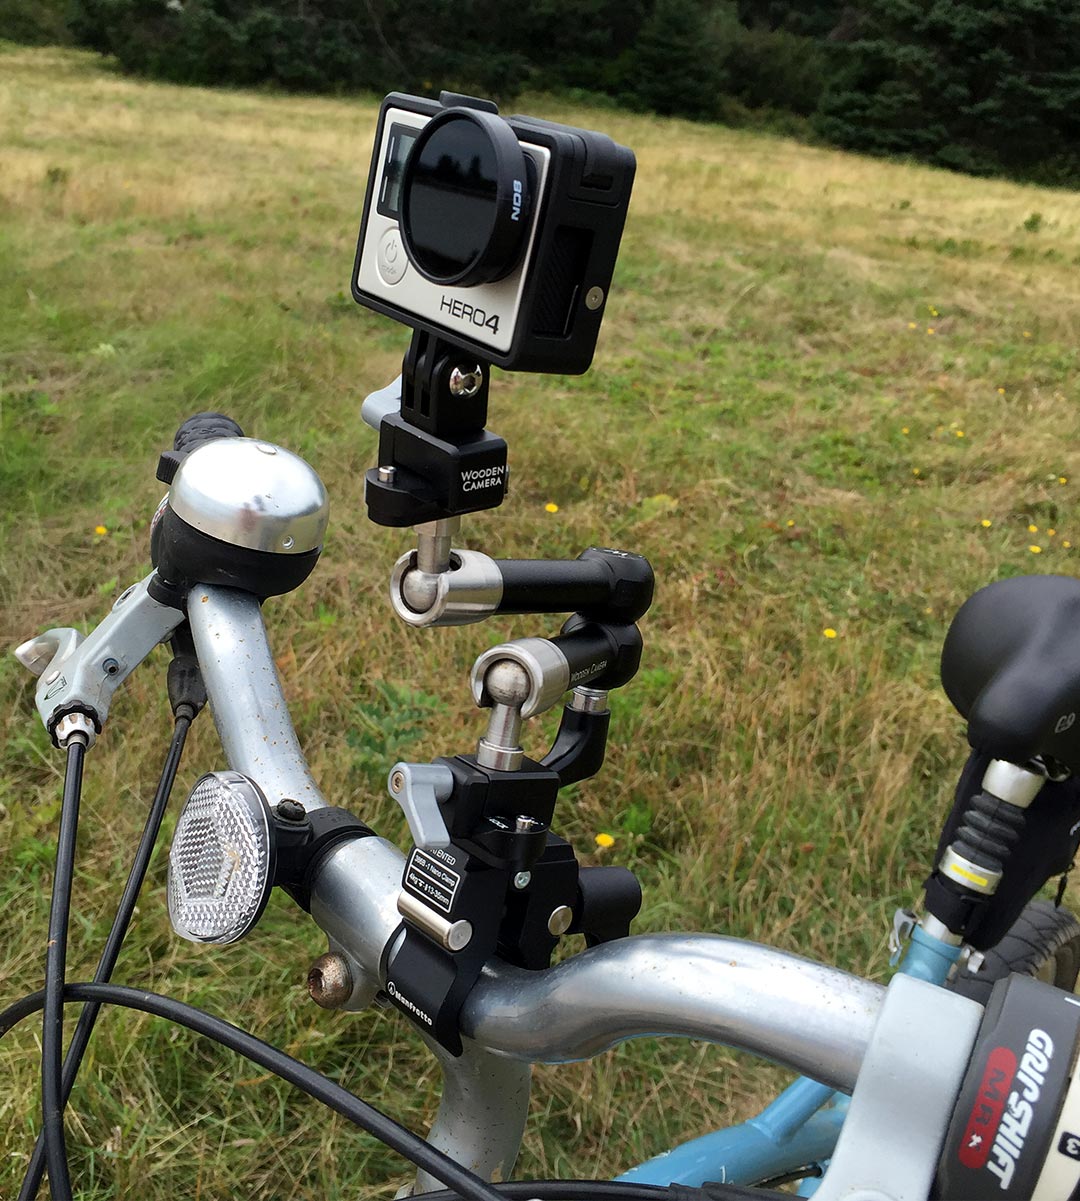 GoPro Hero4 mounted to a bicycle via a Wooden Camera adapter and arm and a Manfrotto Nano clamp. Sunrise, ME. August, 2016.